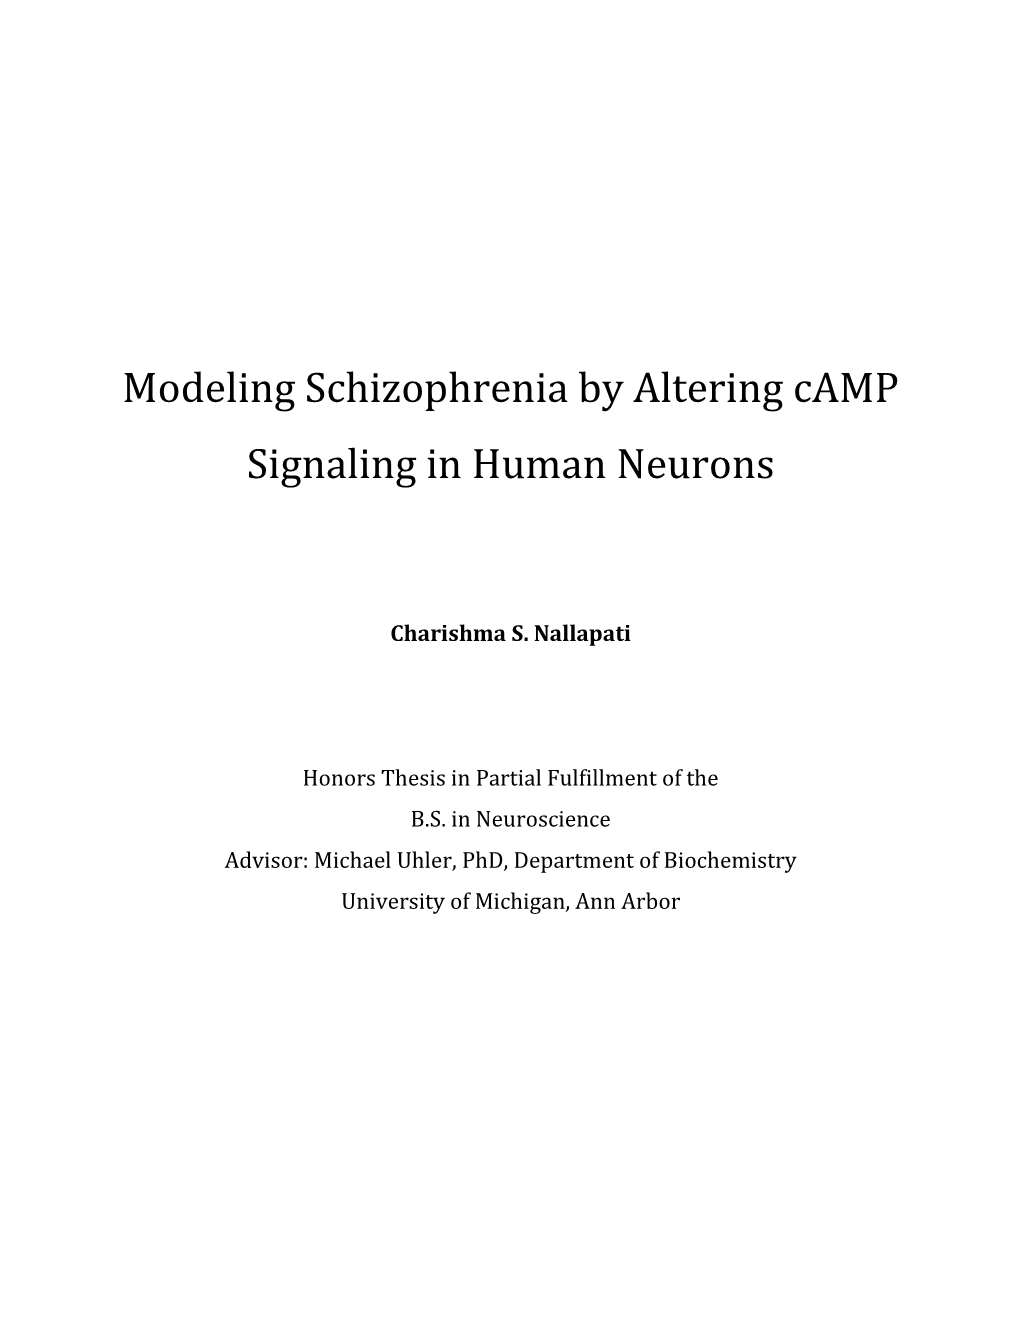 Modeling Schizophrenia by Altering Camp Signaling in Human Neurons